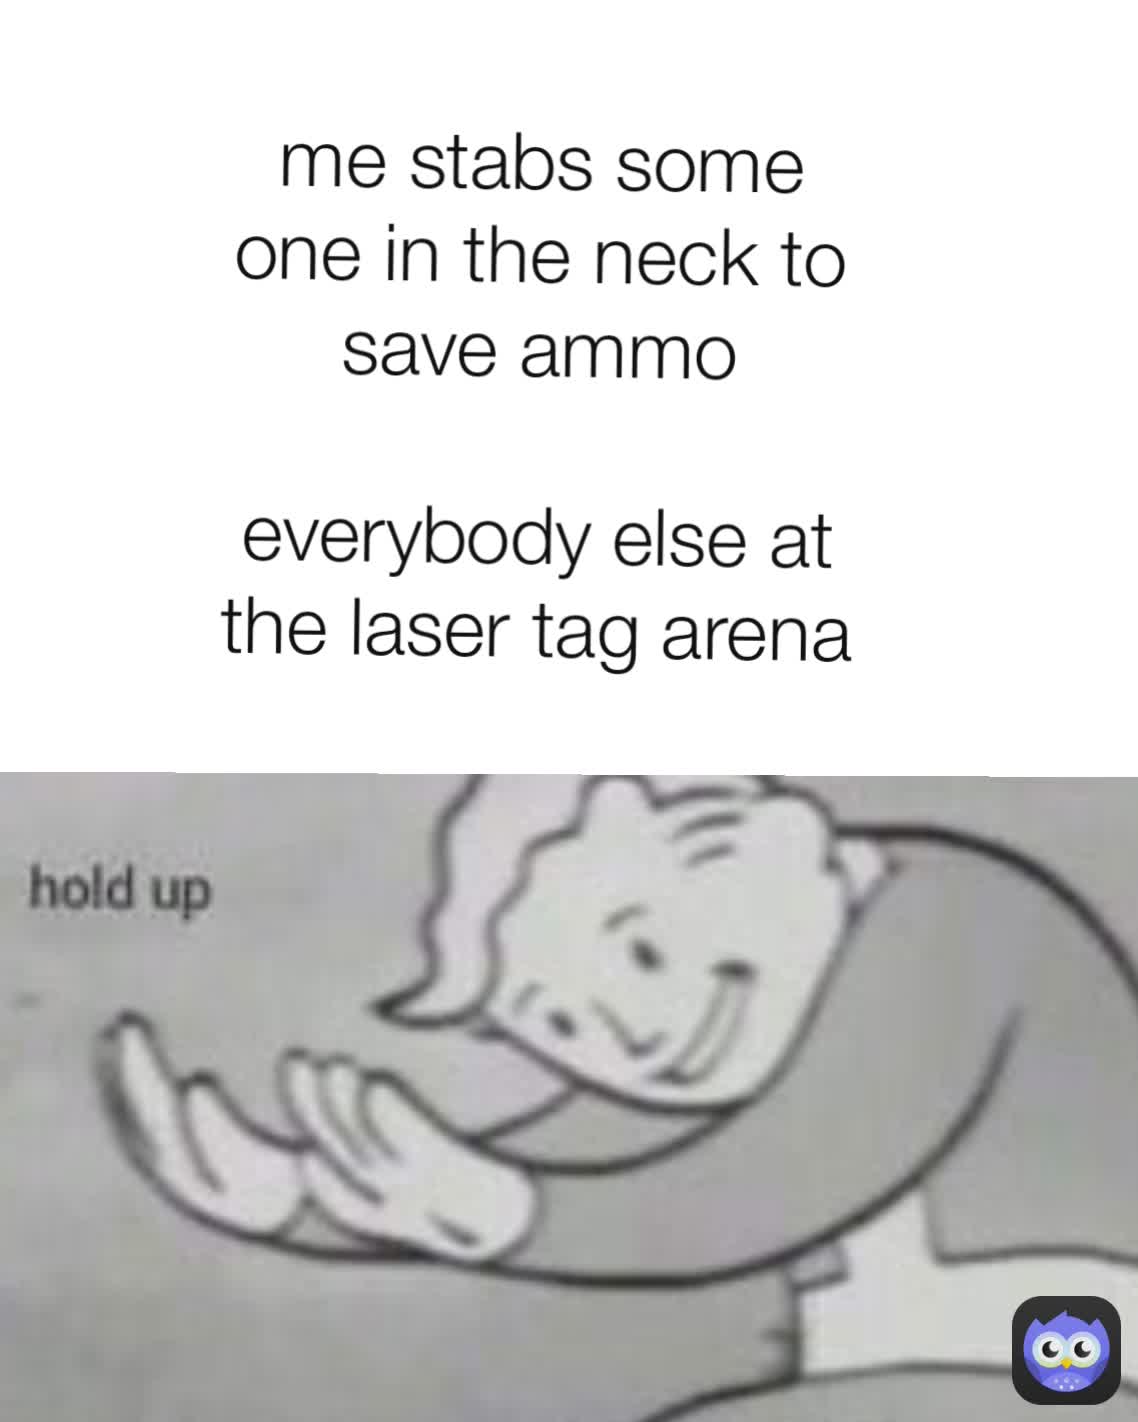 me stabs some one in the neck to save ammo

everybody else at the laser tag arena
 